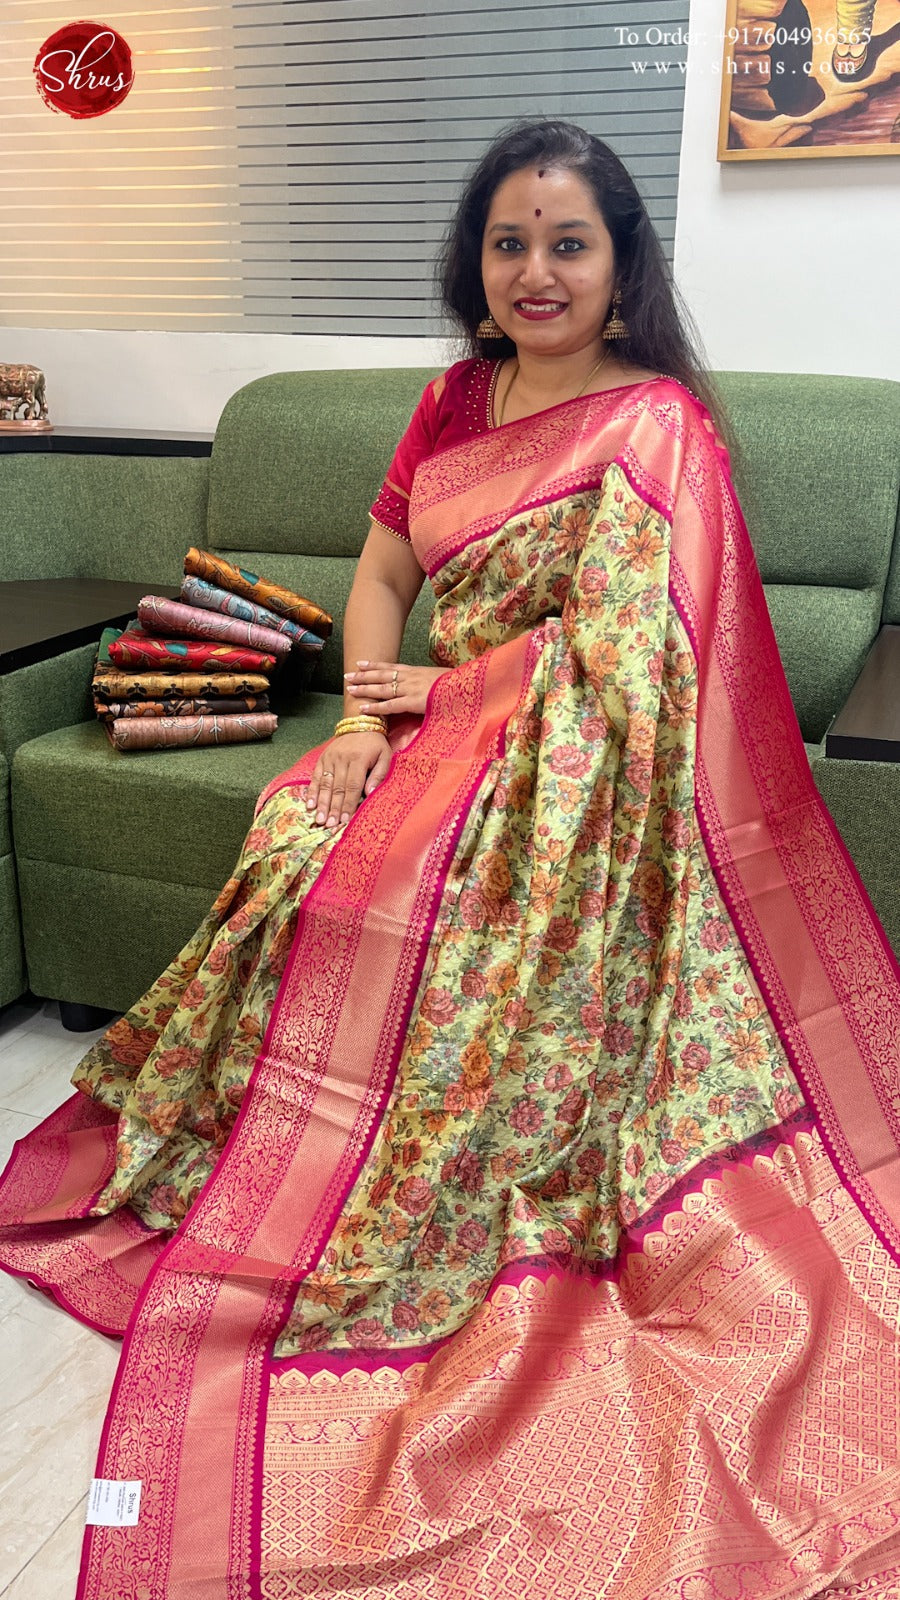 Green & Pink - Art Gadwal with floral print on the body & Contrast Zari Border - Shop on ShrusEternity.com